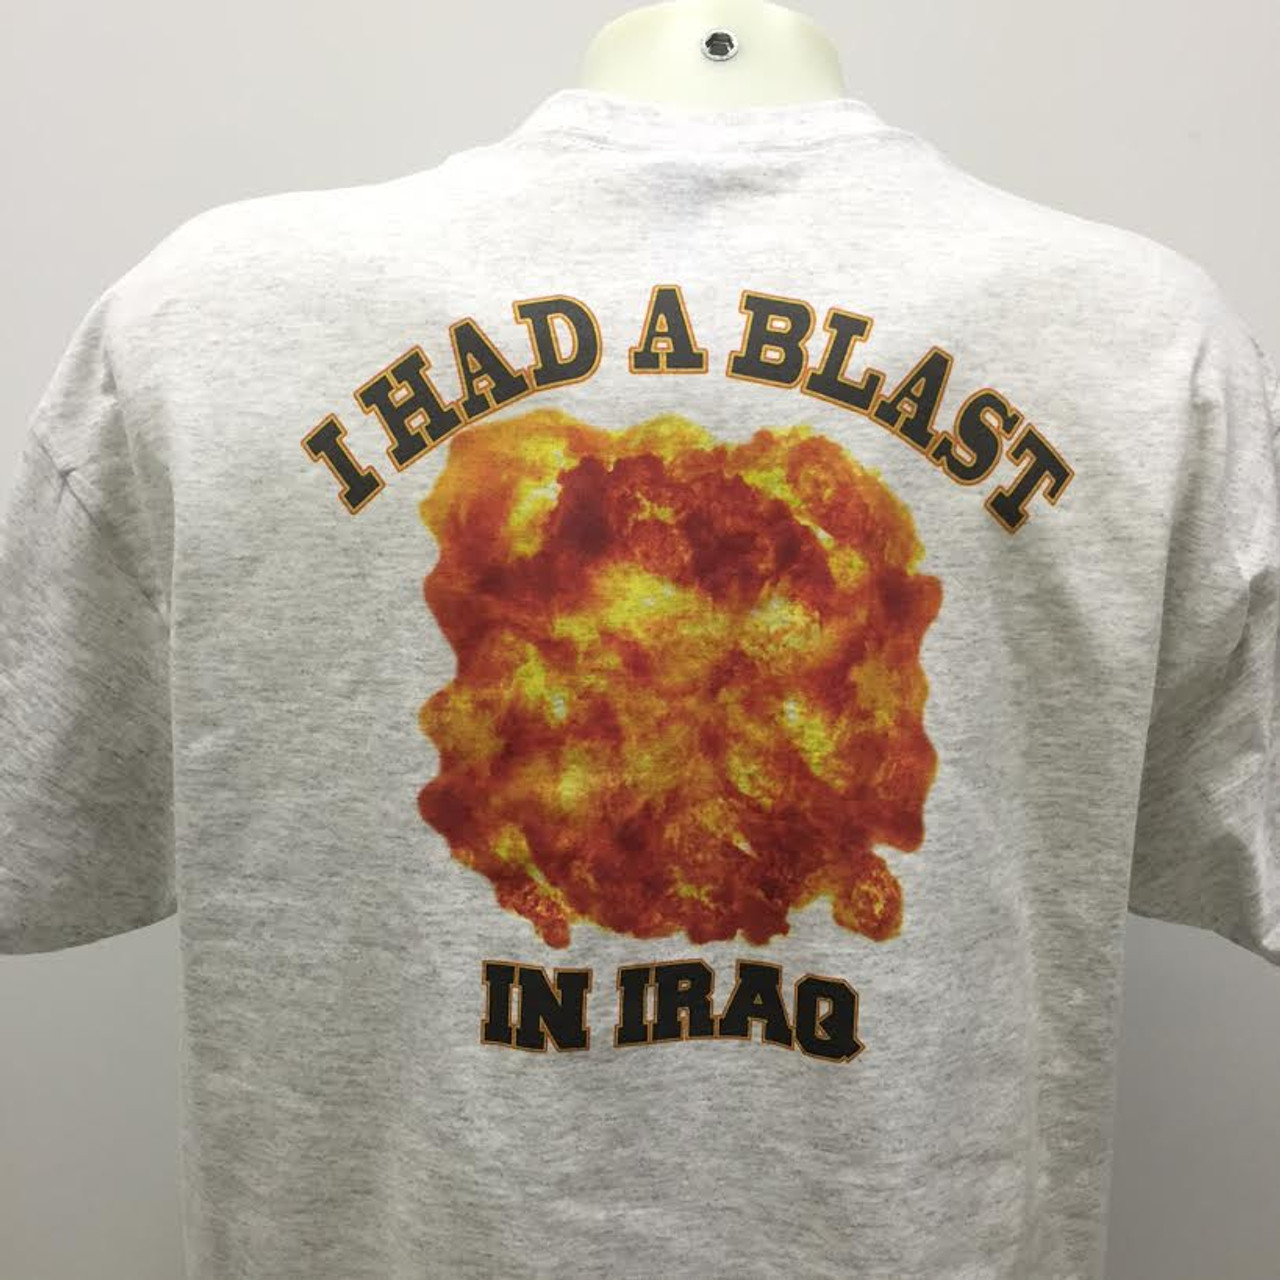 I Had A Blast In Iraq T Shirt and motorcycle shirts